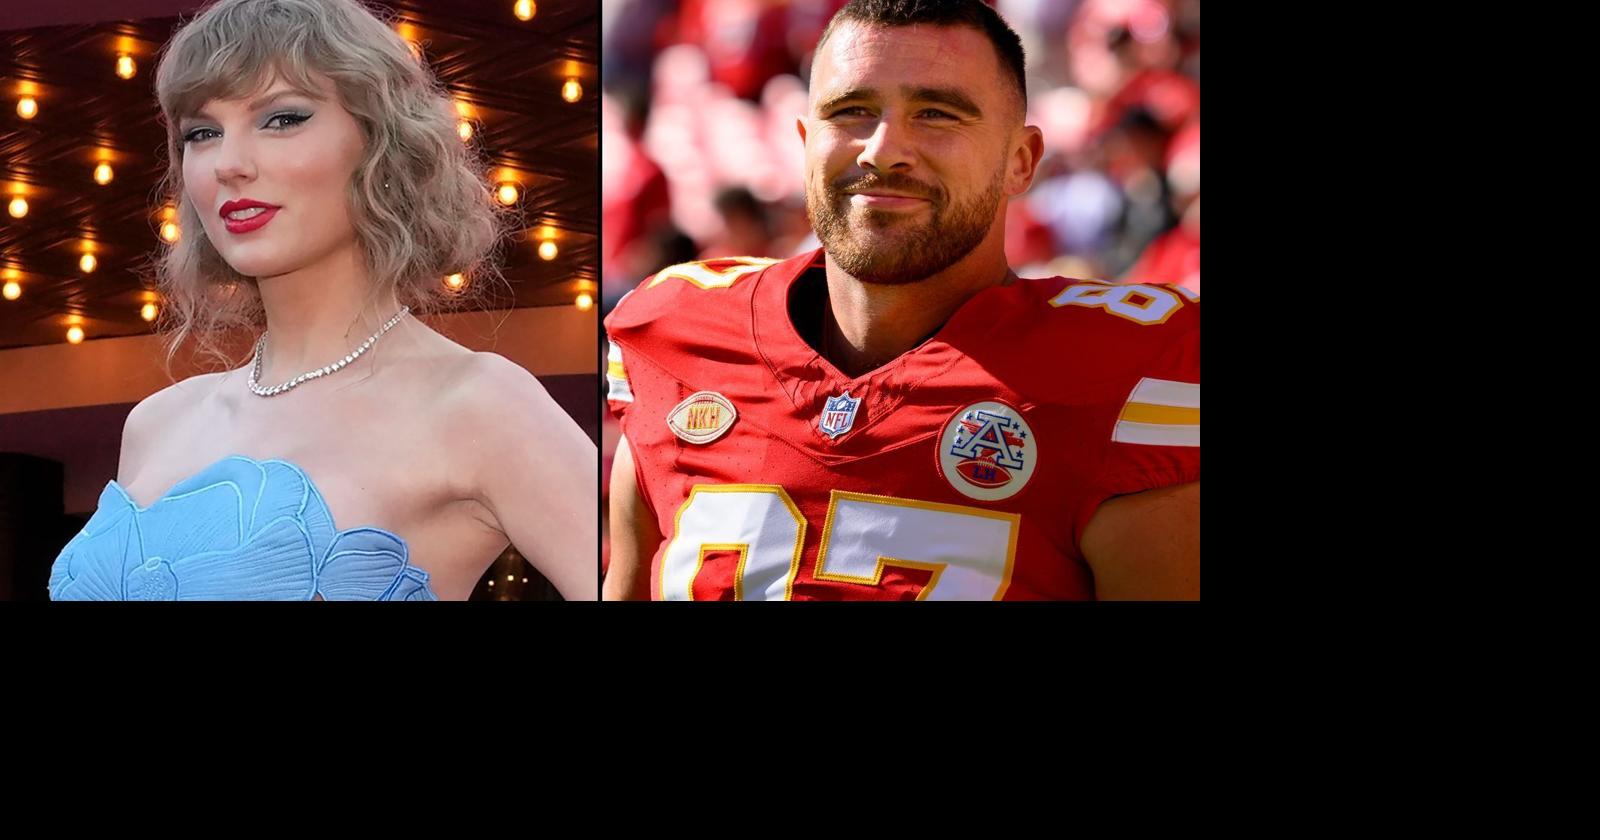 Philadelphia radio station says they won't play Taylor Swift songs ahead of  Eagles-Chiefs Super Bowl rematch